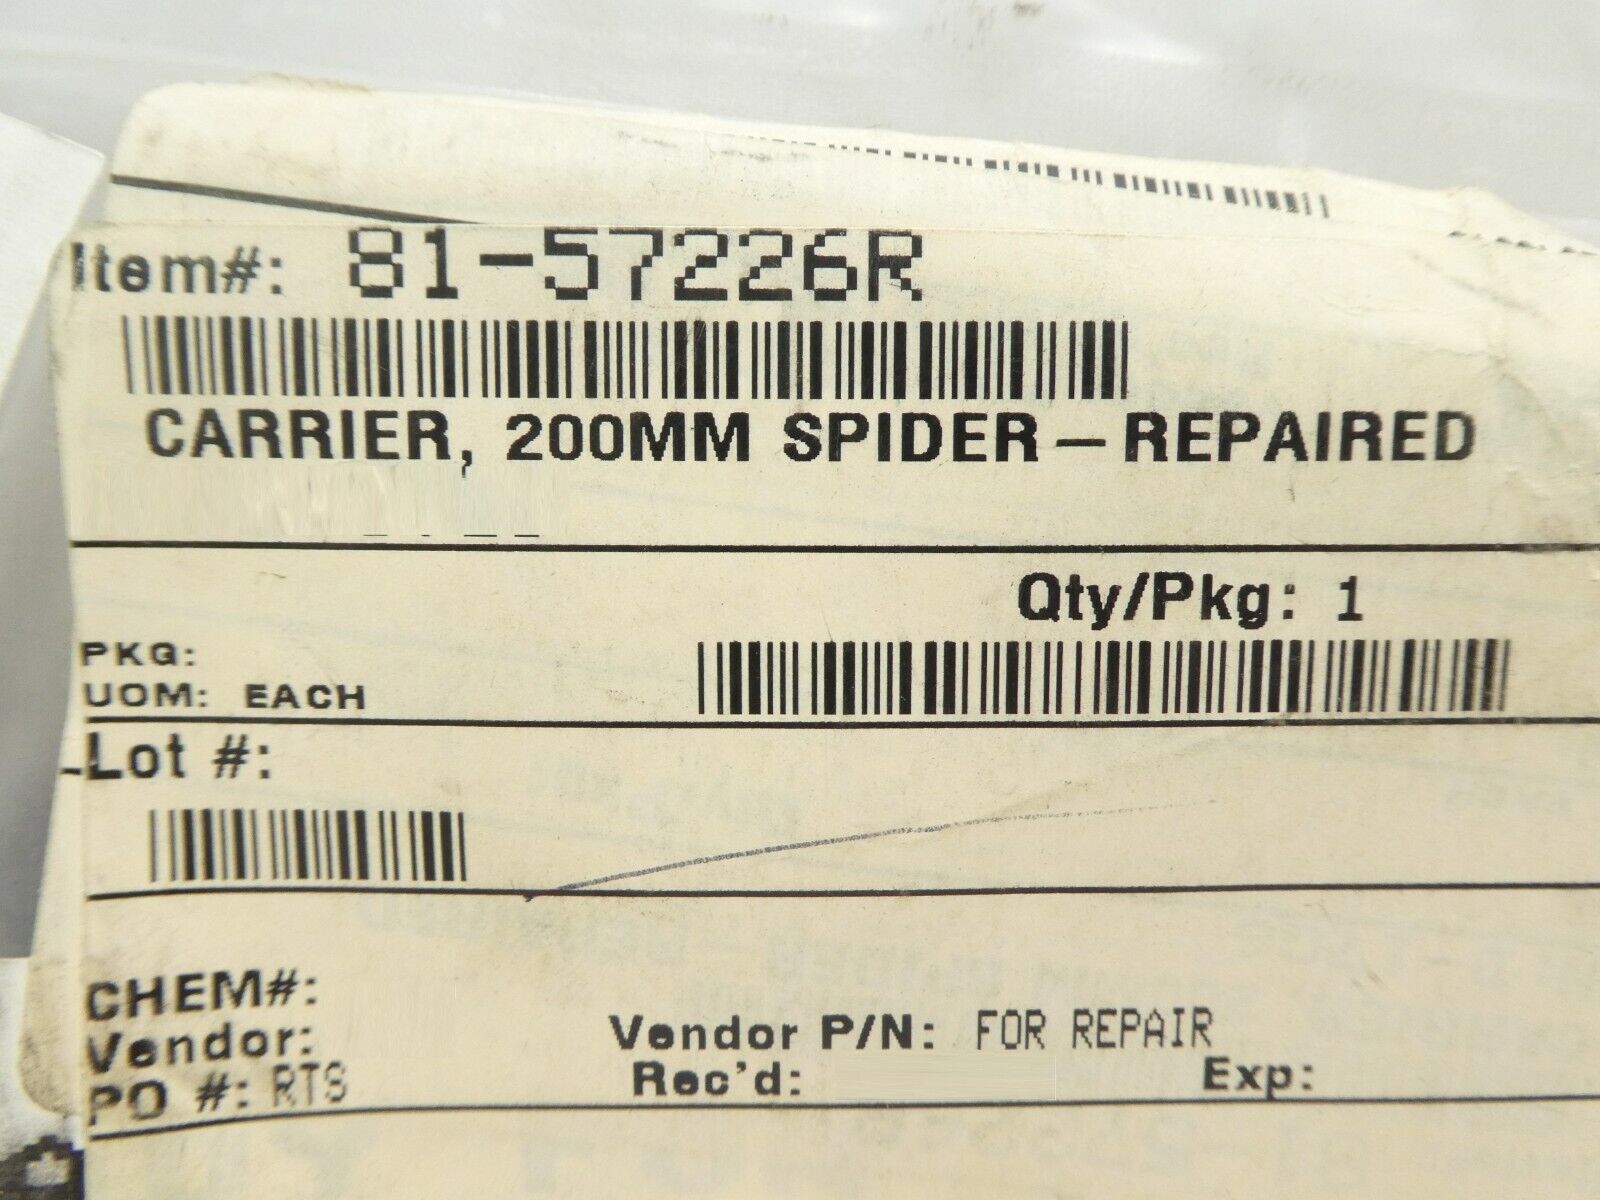 AMAT Applied Materials Spider Carrier 200mm Micron 81-57226R OEM Refurbished